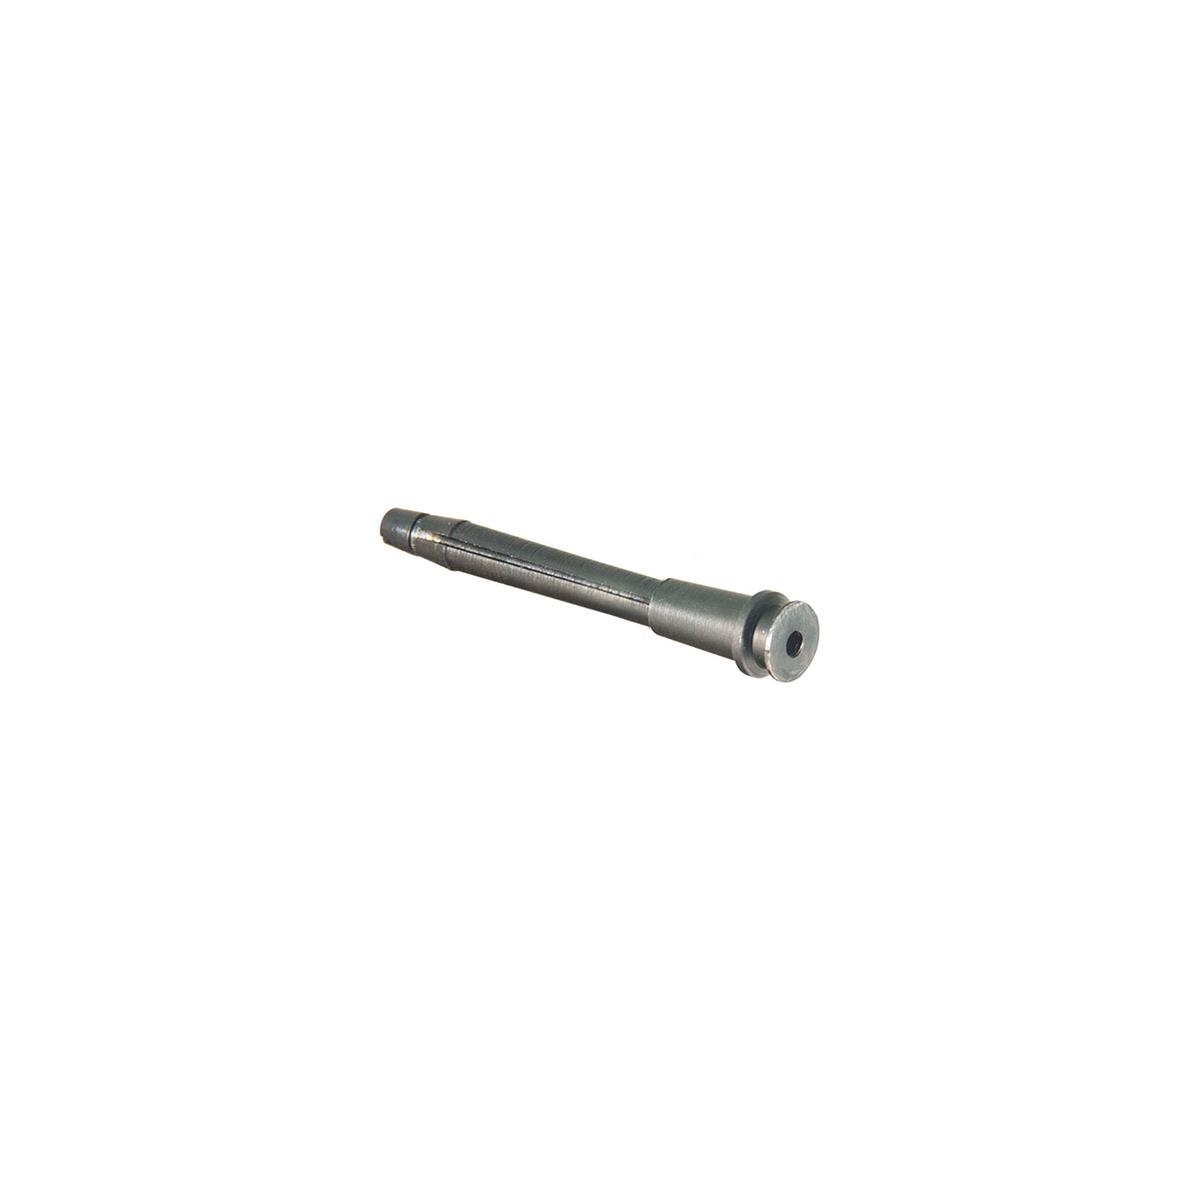 Image of UTG Leapers .308/7.62x51mm Broken Shell Extractor